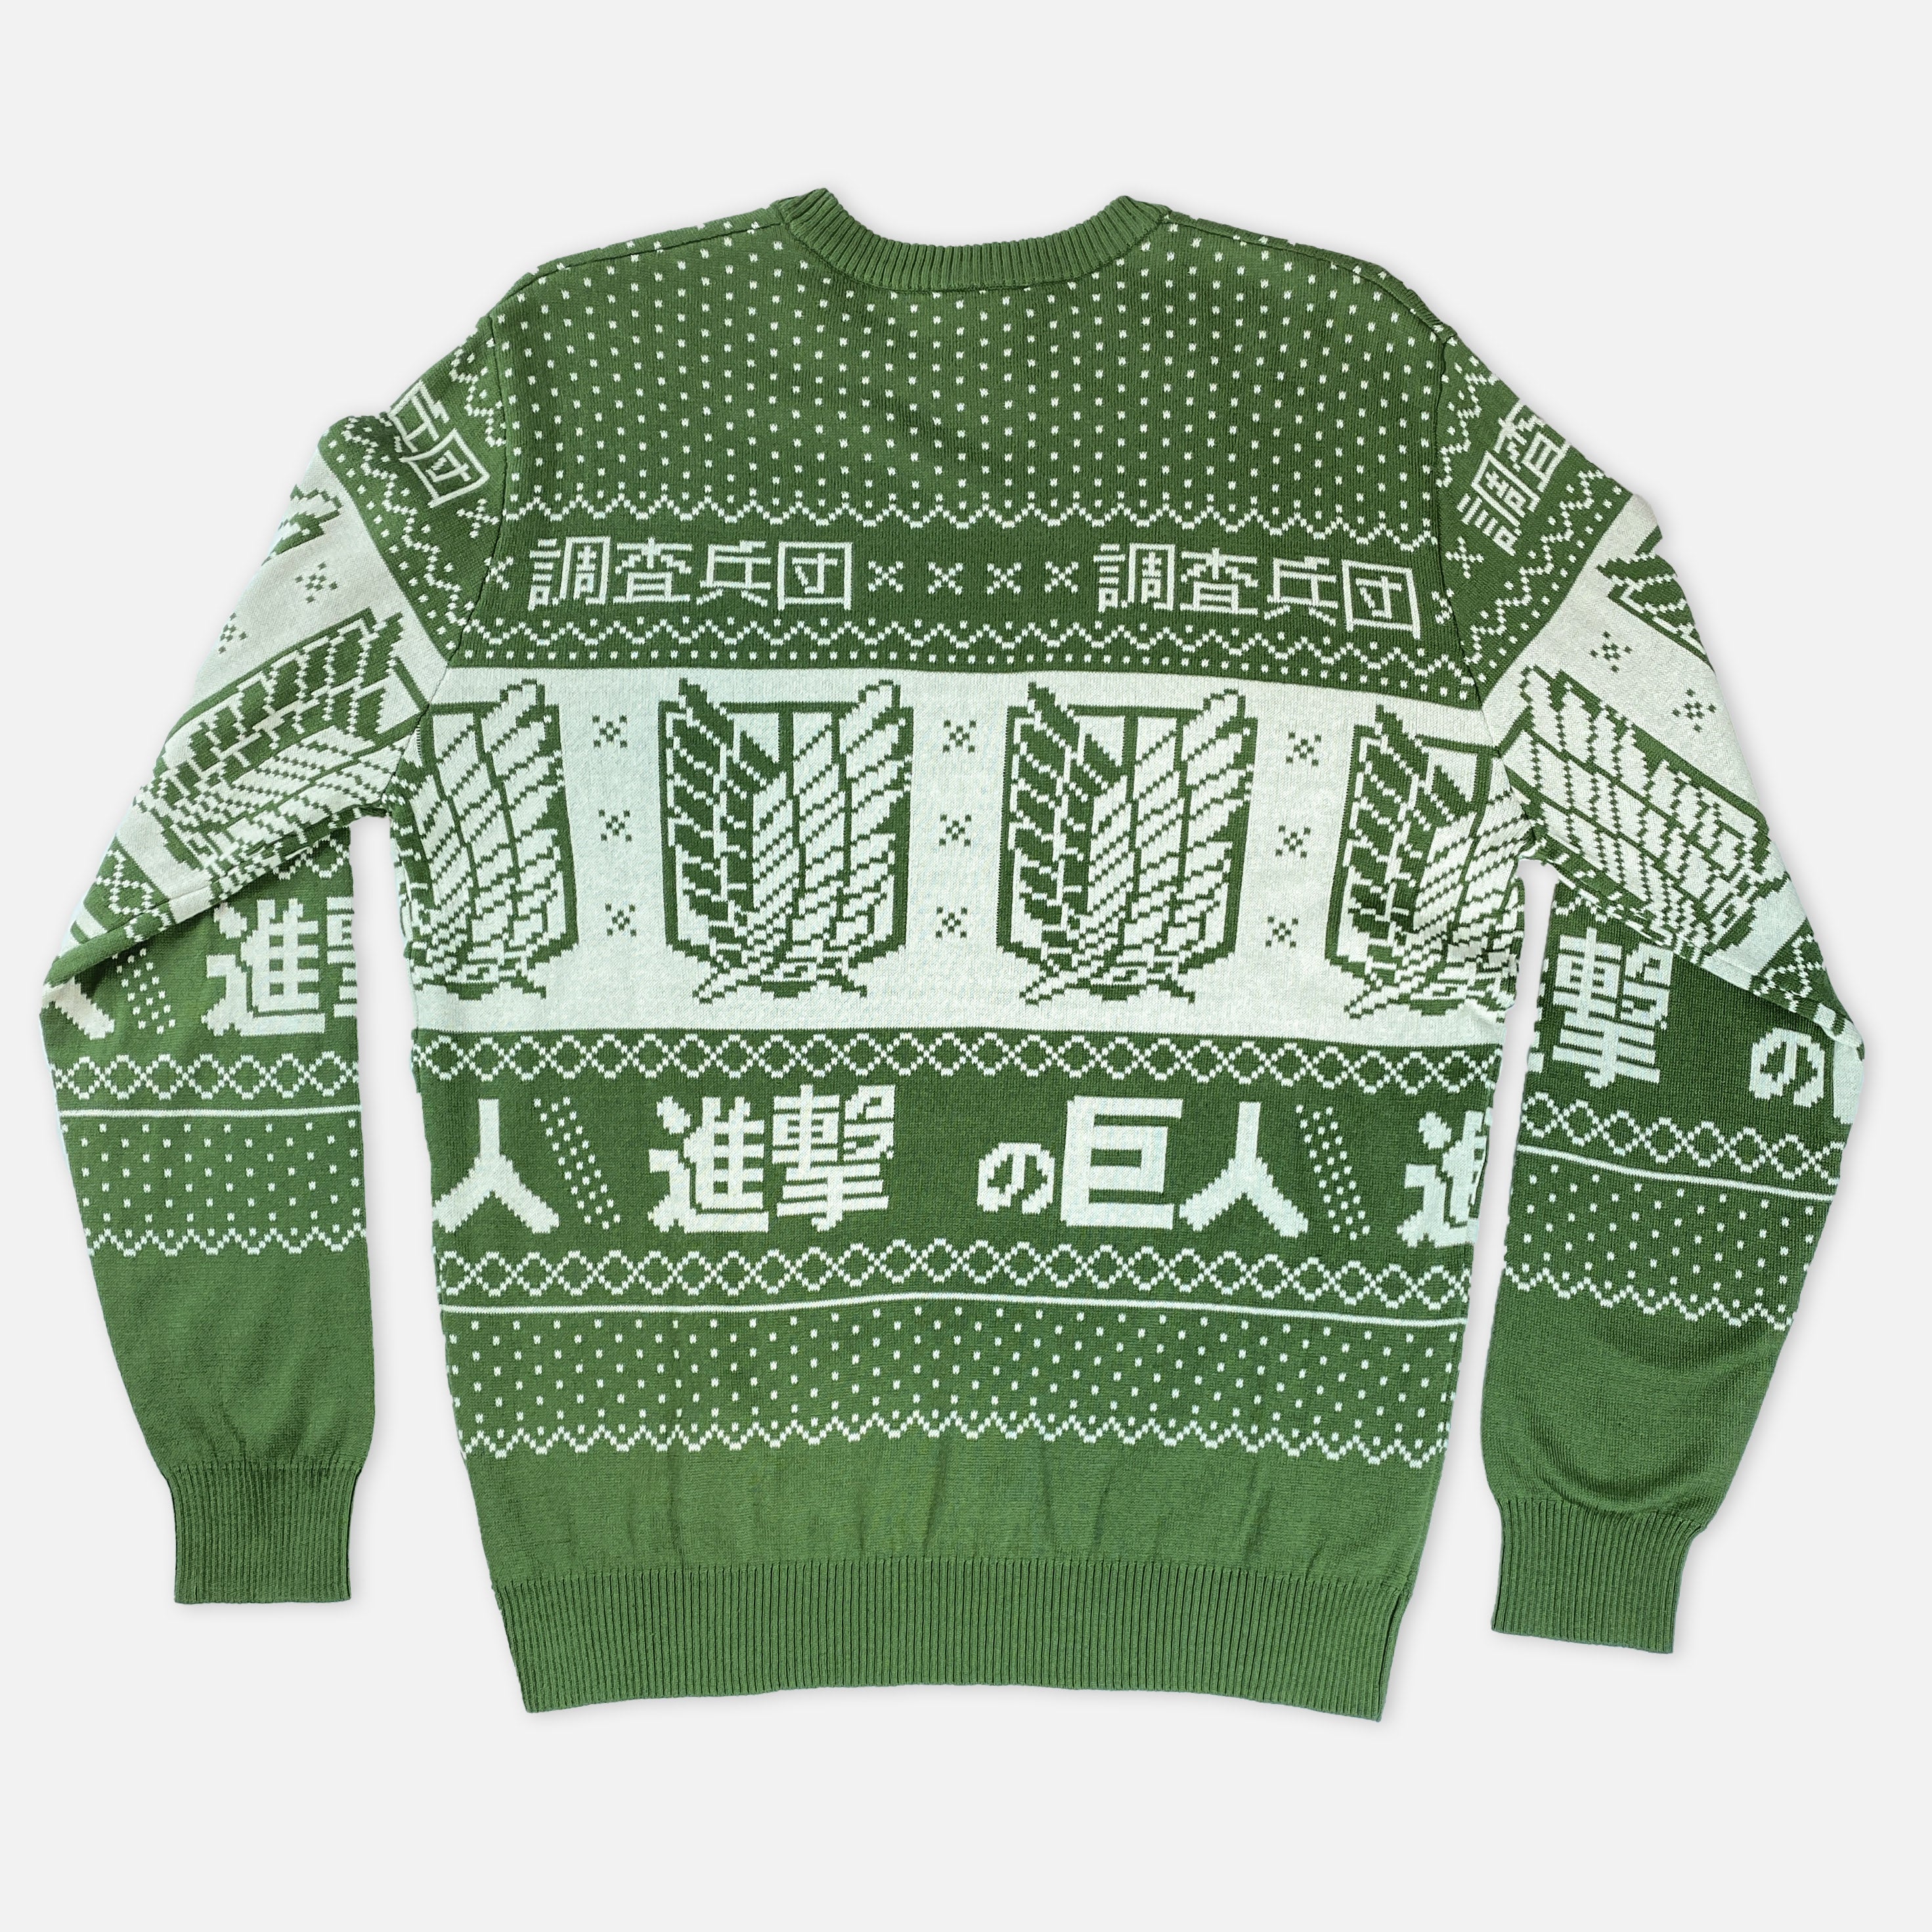 Attack on Titan - Scout Regiment Holiday Sweater - Crunchyroll Exclusive! image count 2